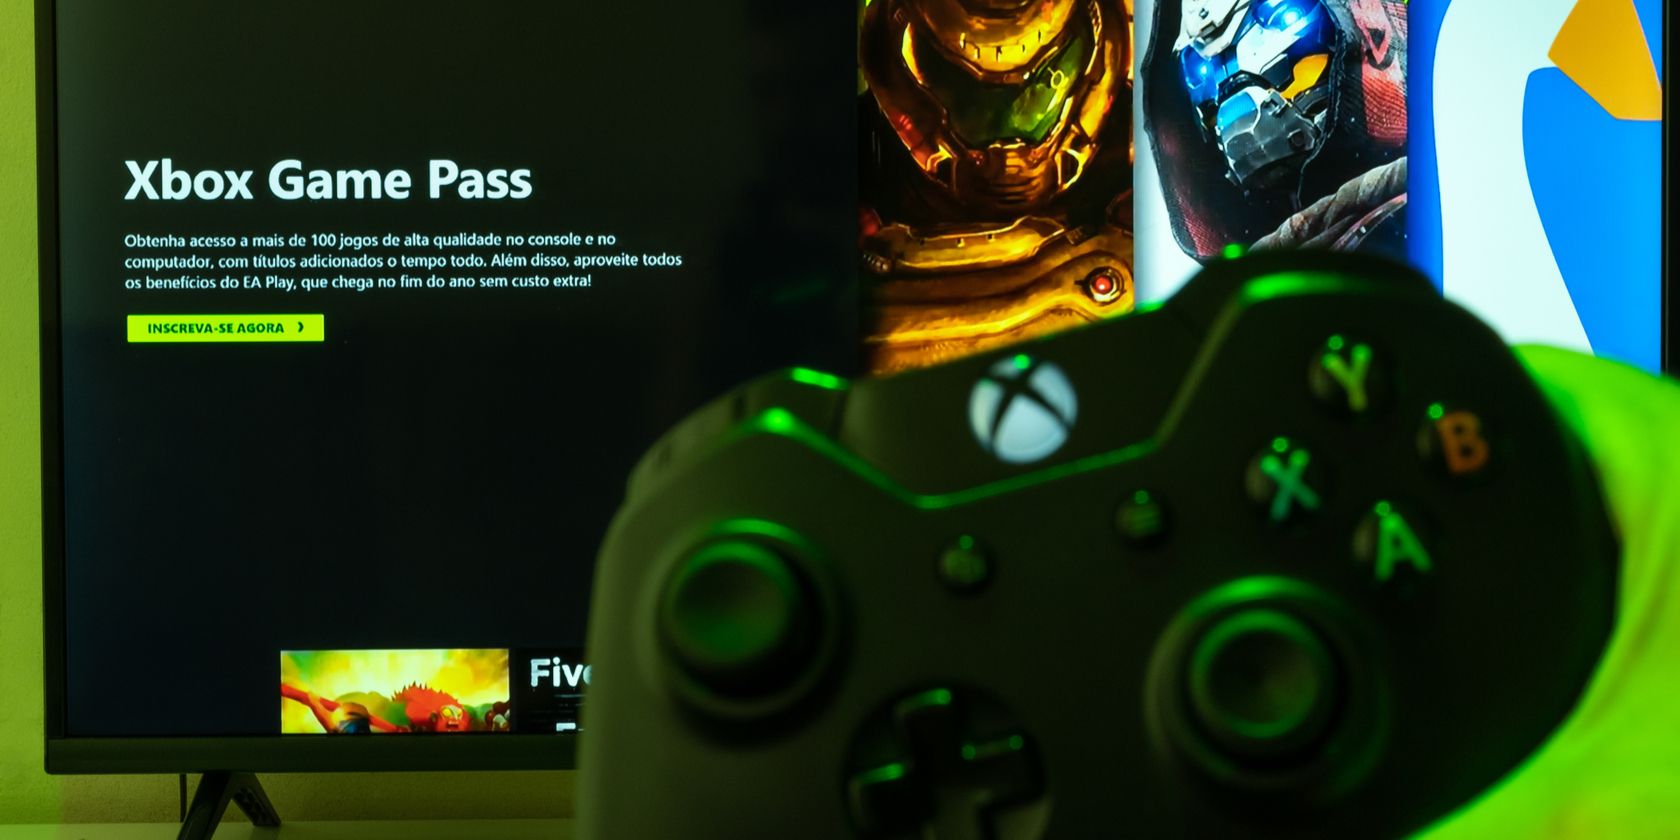 Dronken worden Email gezond verstand Microsoft Will Soon Let You Refund Xbox Game Pass Payments